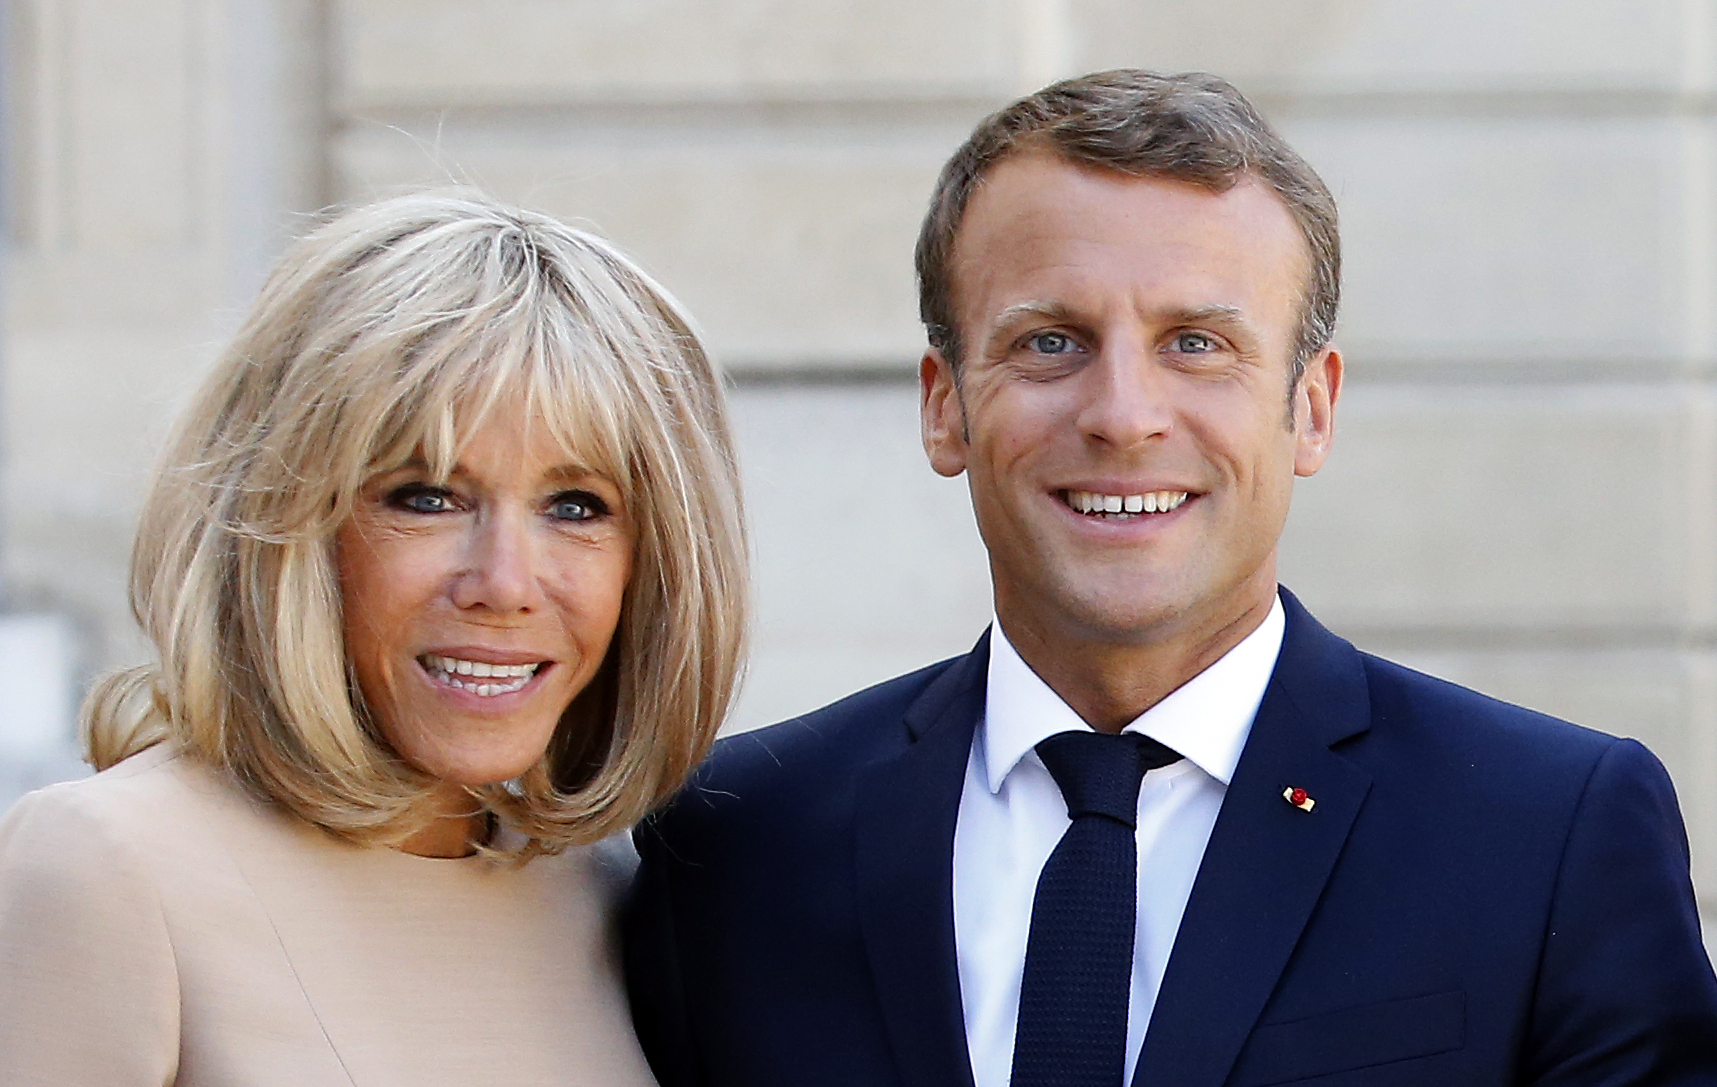 PARIS, FRANCE - AUGUST 22: French President Emmanuel Macron and his wife Brigitte Macron wait for Greek Prime Minister Kyriakos Mitsotakis and his wife Mareva Grabowski prior to their meeting at the Elysee Presidential Palace on August 22, 2019 in Paris, France. Kyriakos Mitsotakis is on an official visit to Paris. (Photo by Chesnot/Getty Images)